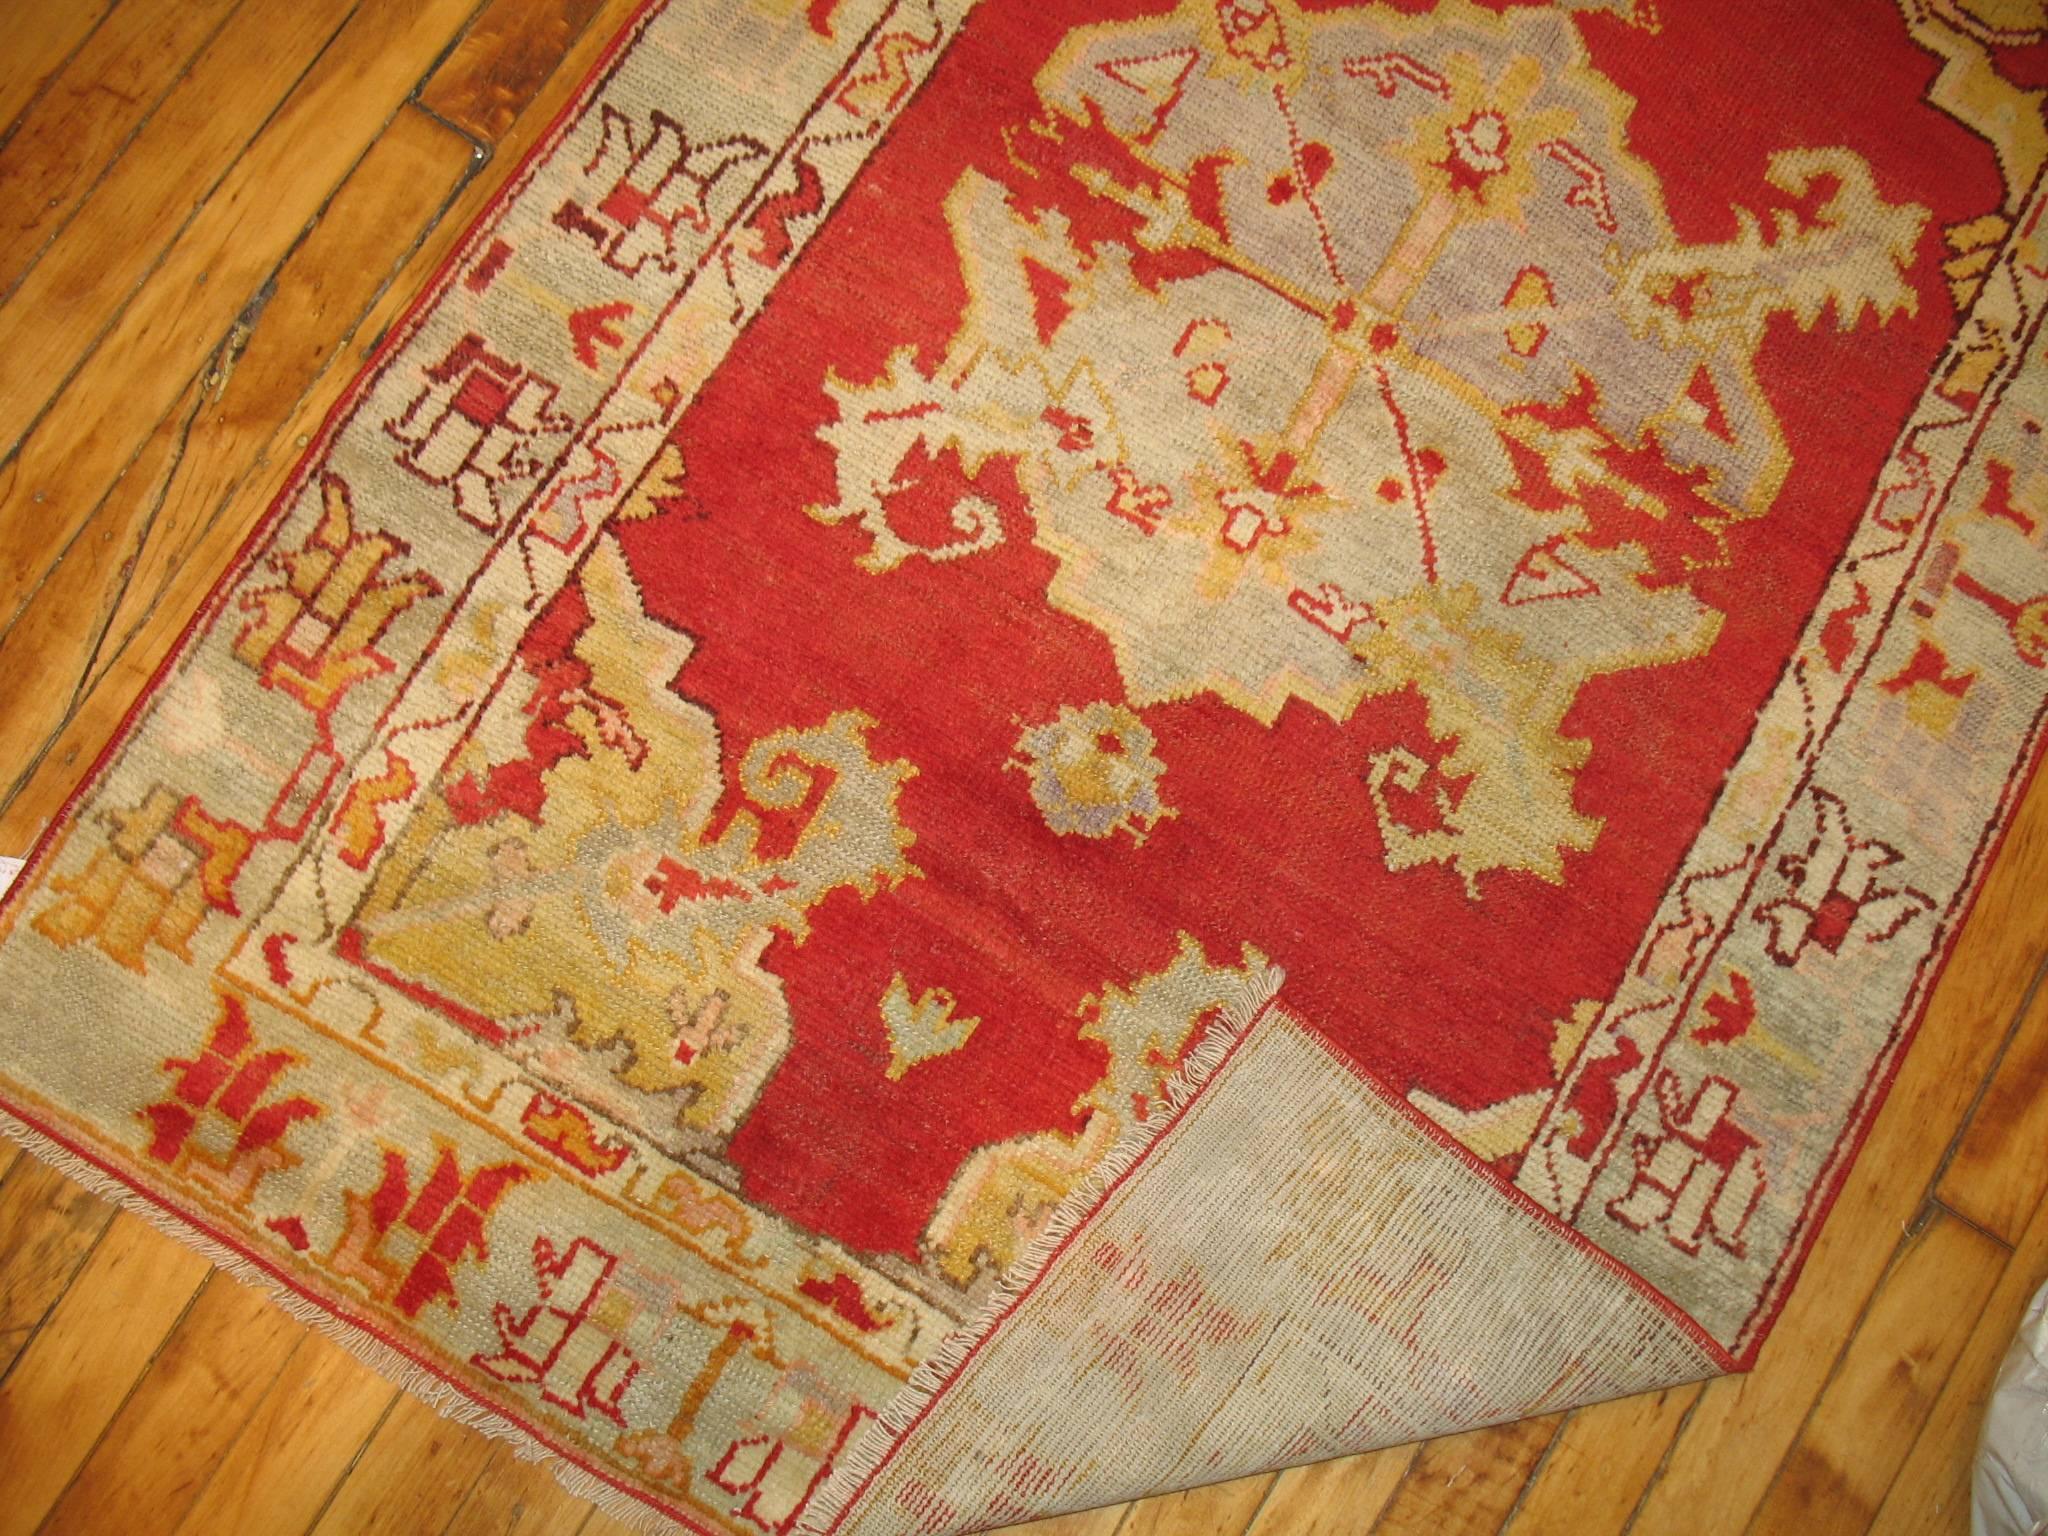 A brightly colored vintage Turkish Oushak rug.